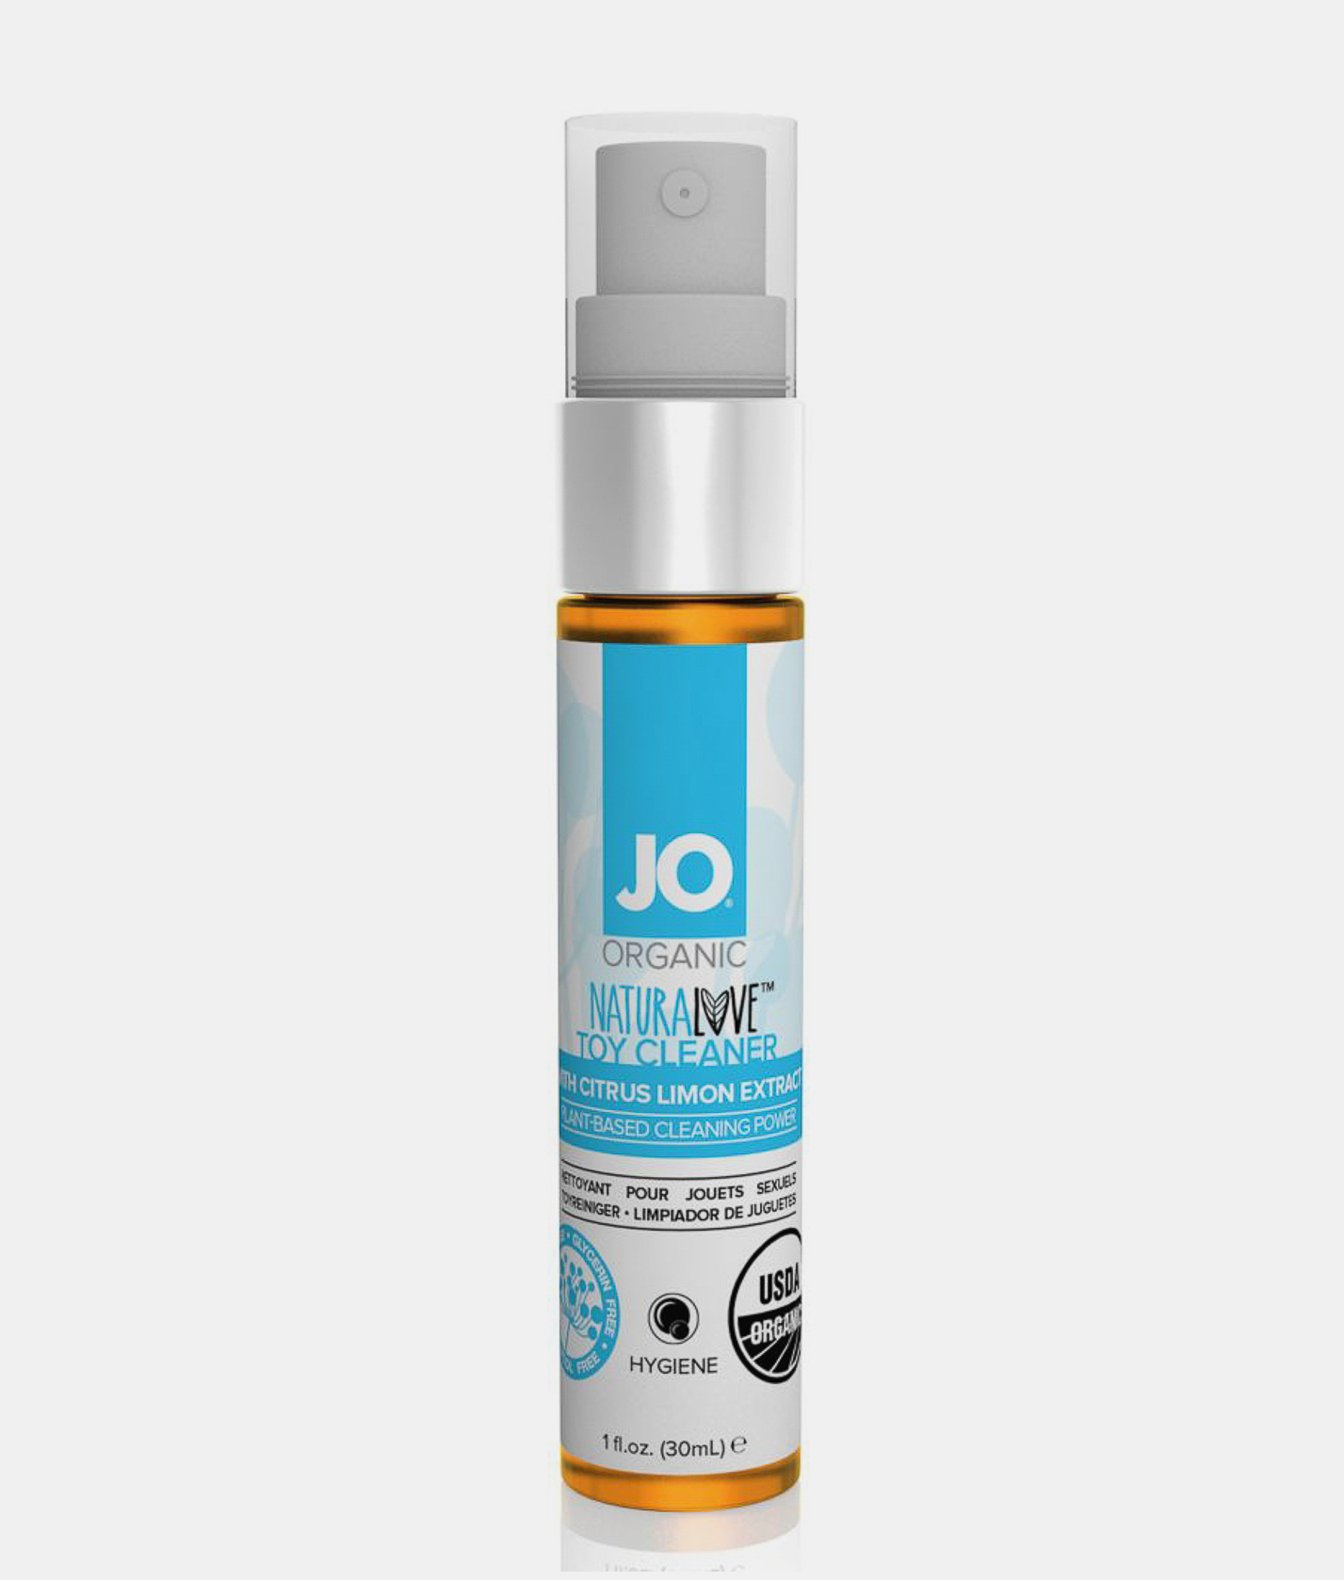 System JO Organic NaturaLove toy cleaner